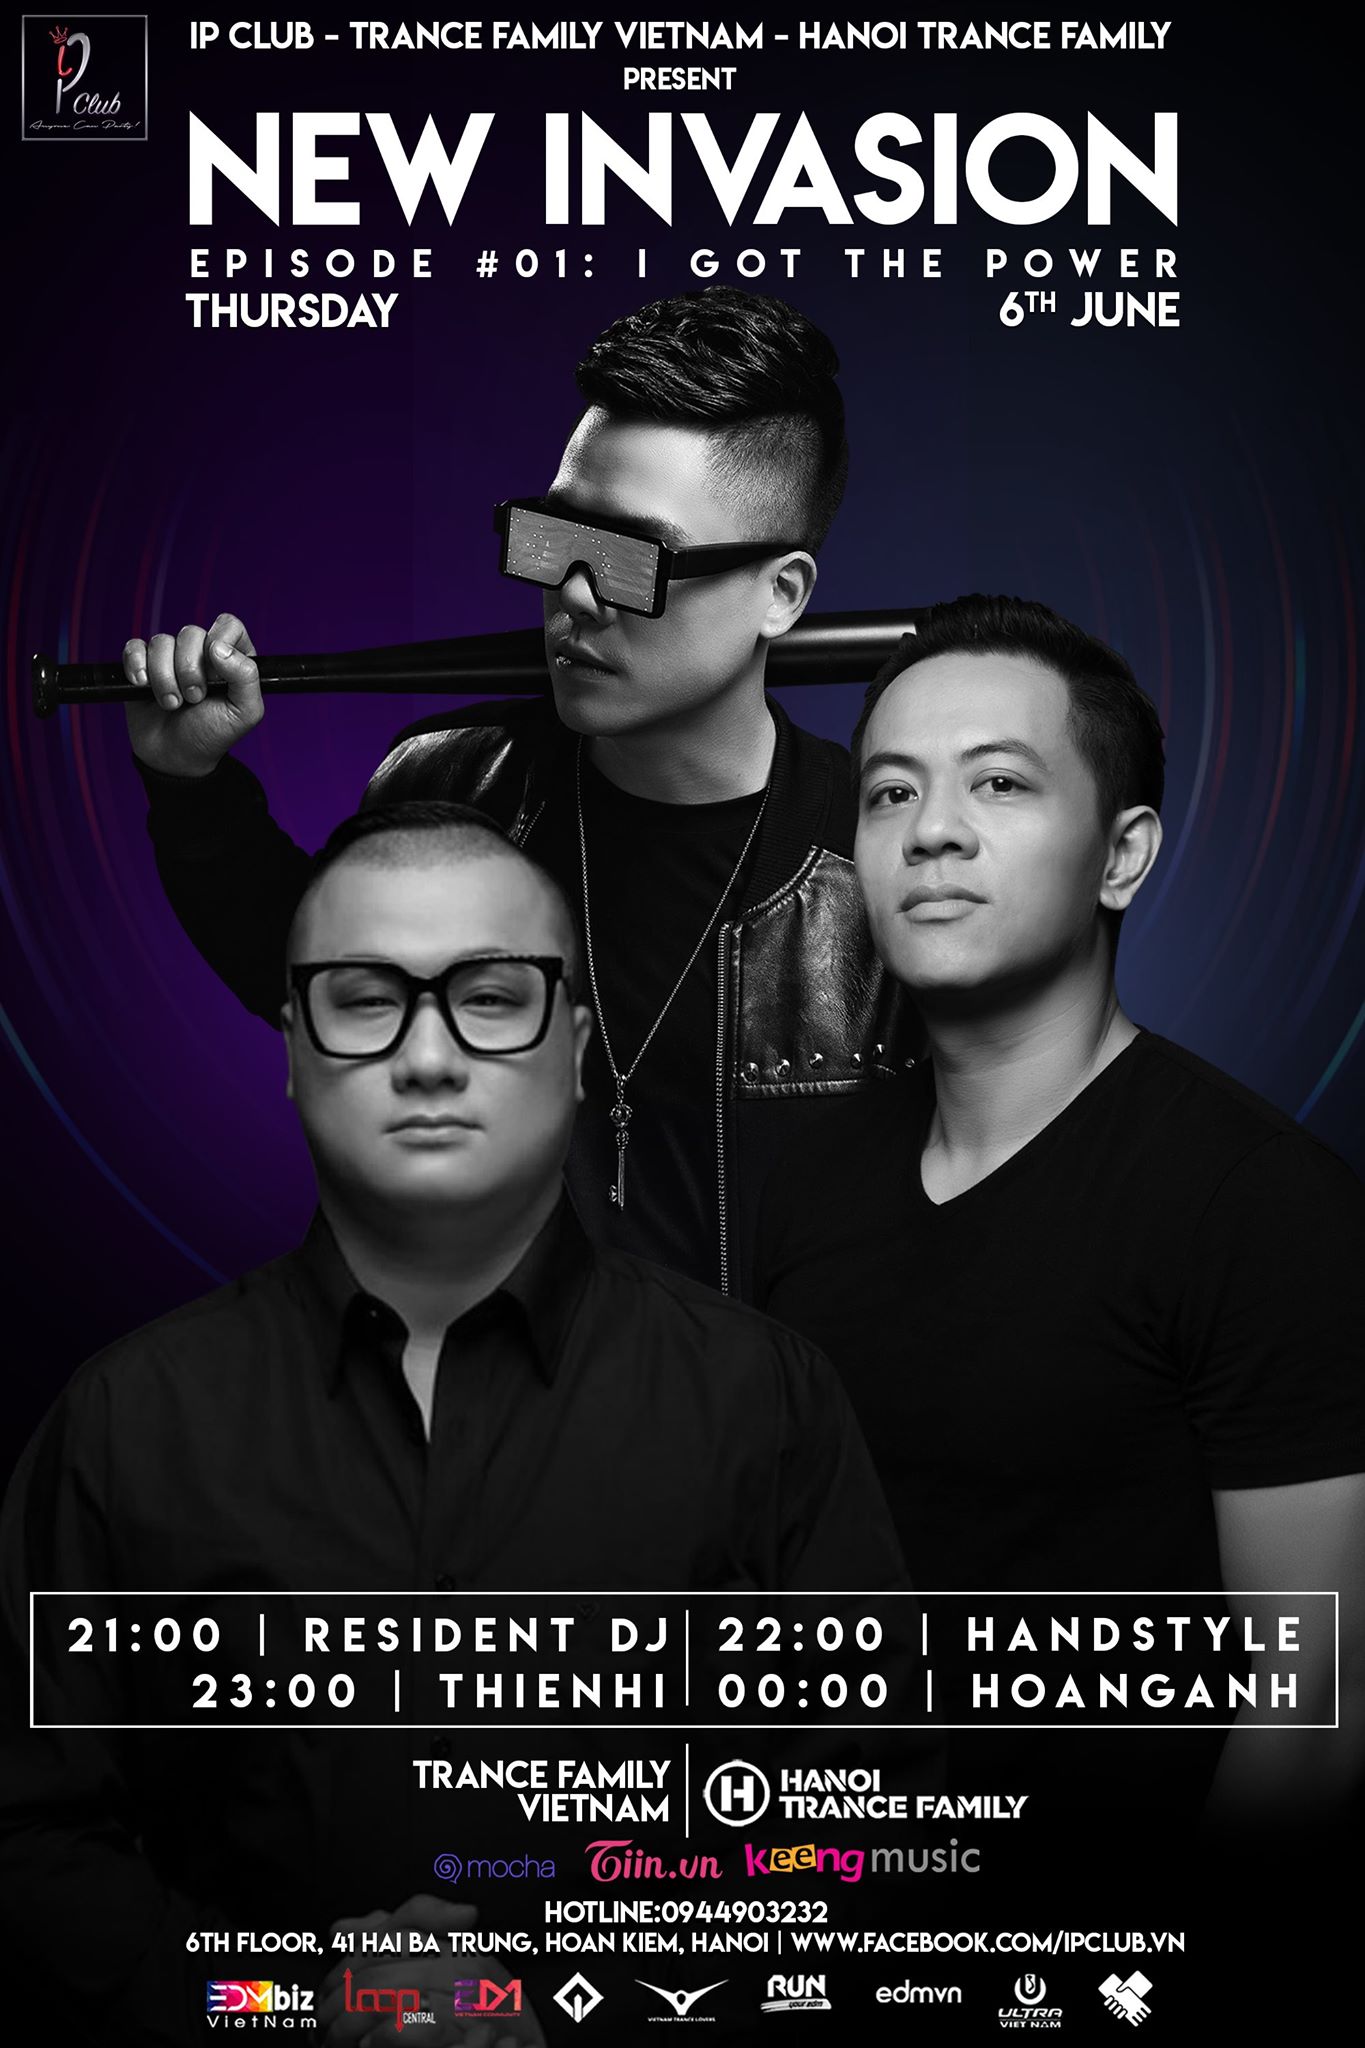 New Invasion #1: I Got the Power featuring HOÀNG ANH, THIỆN HÍ & HAND.STYLE [Event Hà Nội]